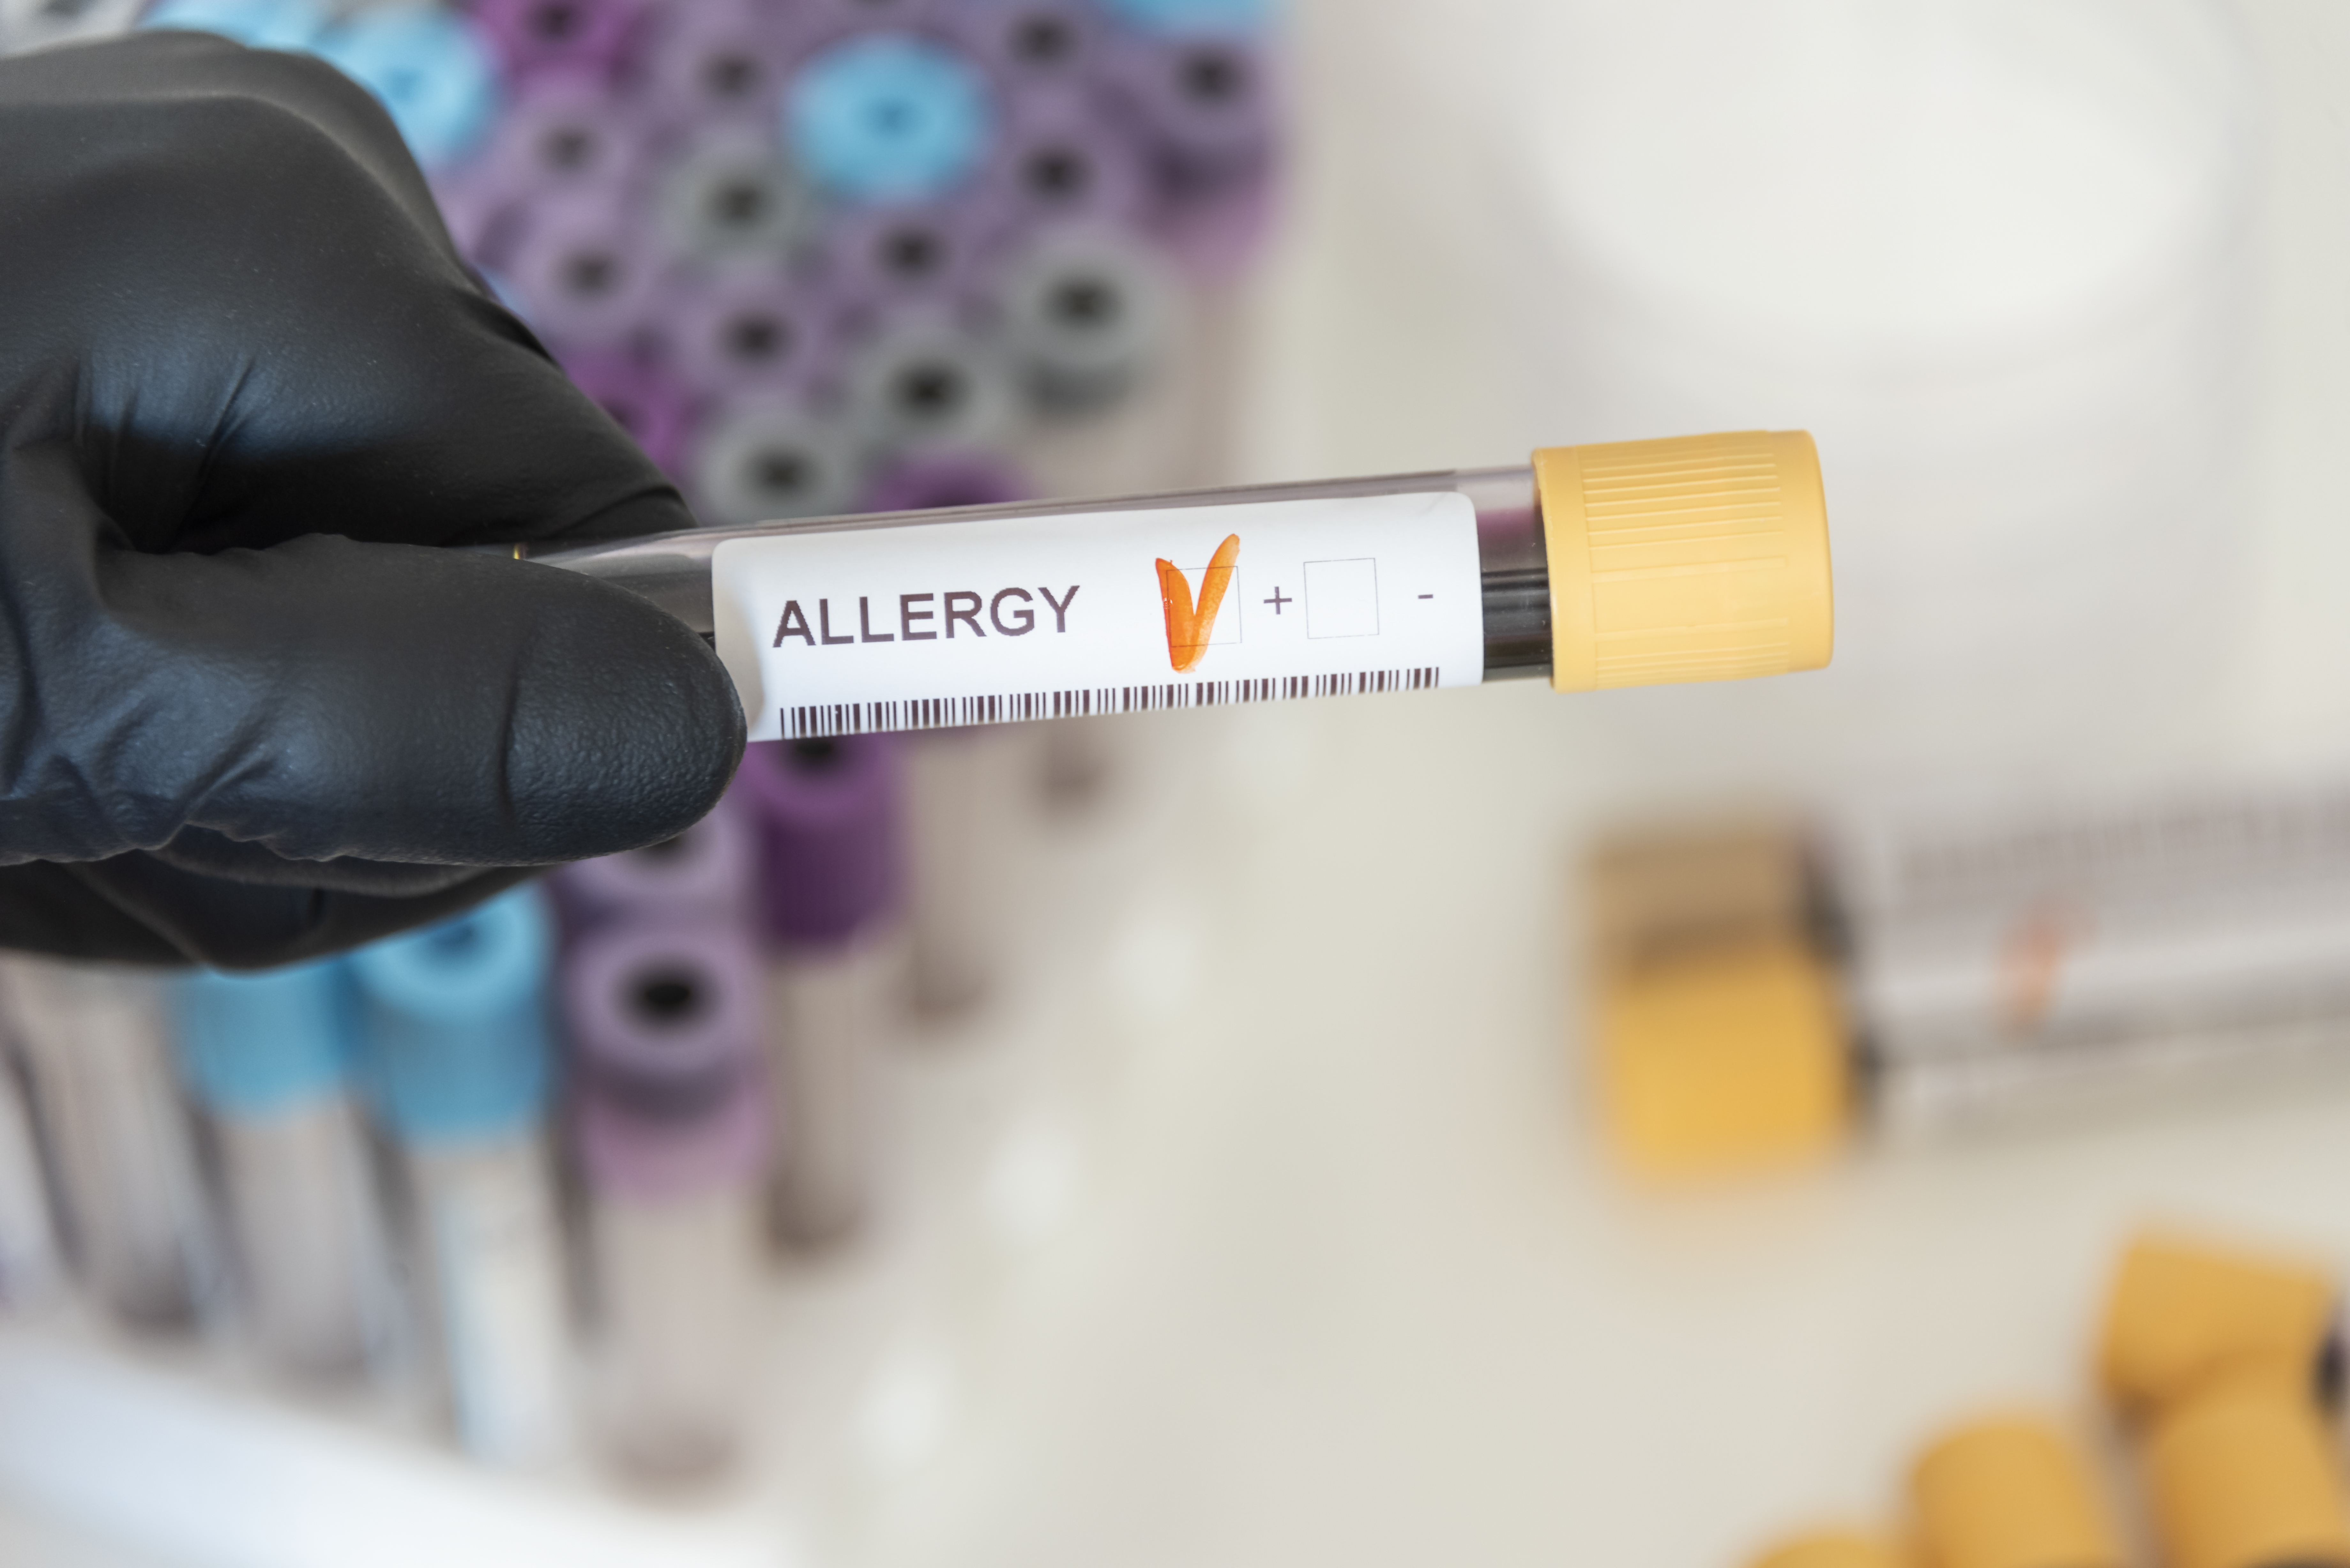 patient blood sample testing positive for allergy